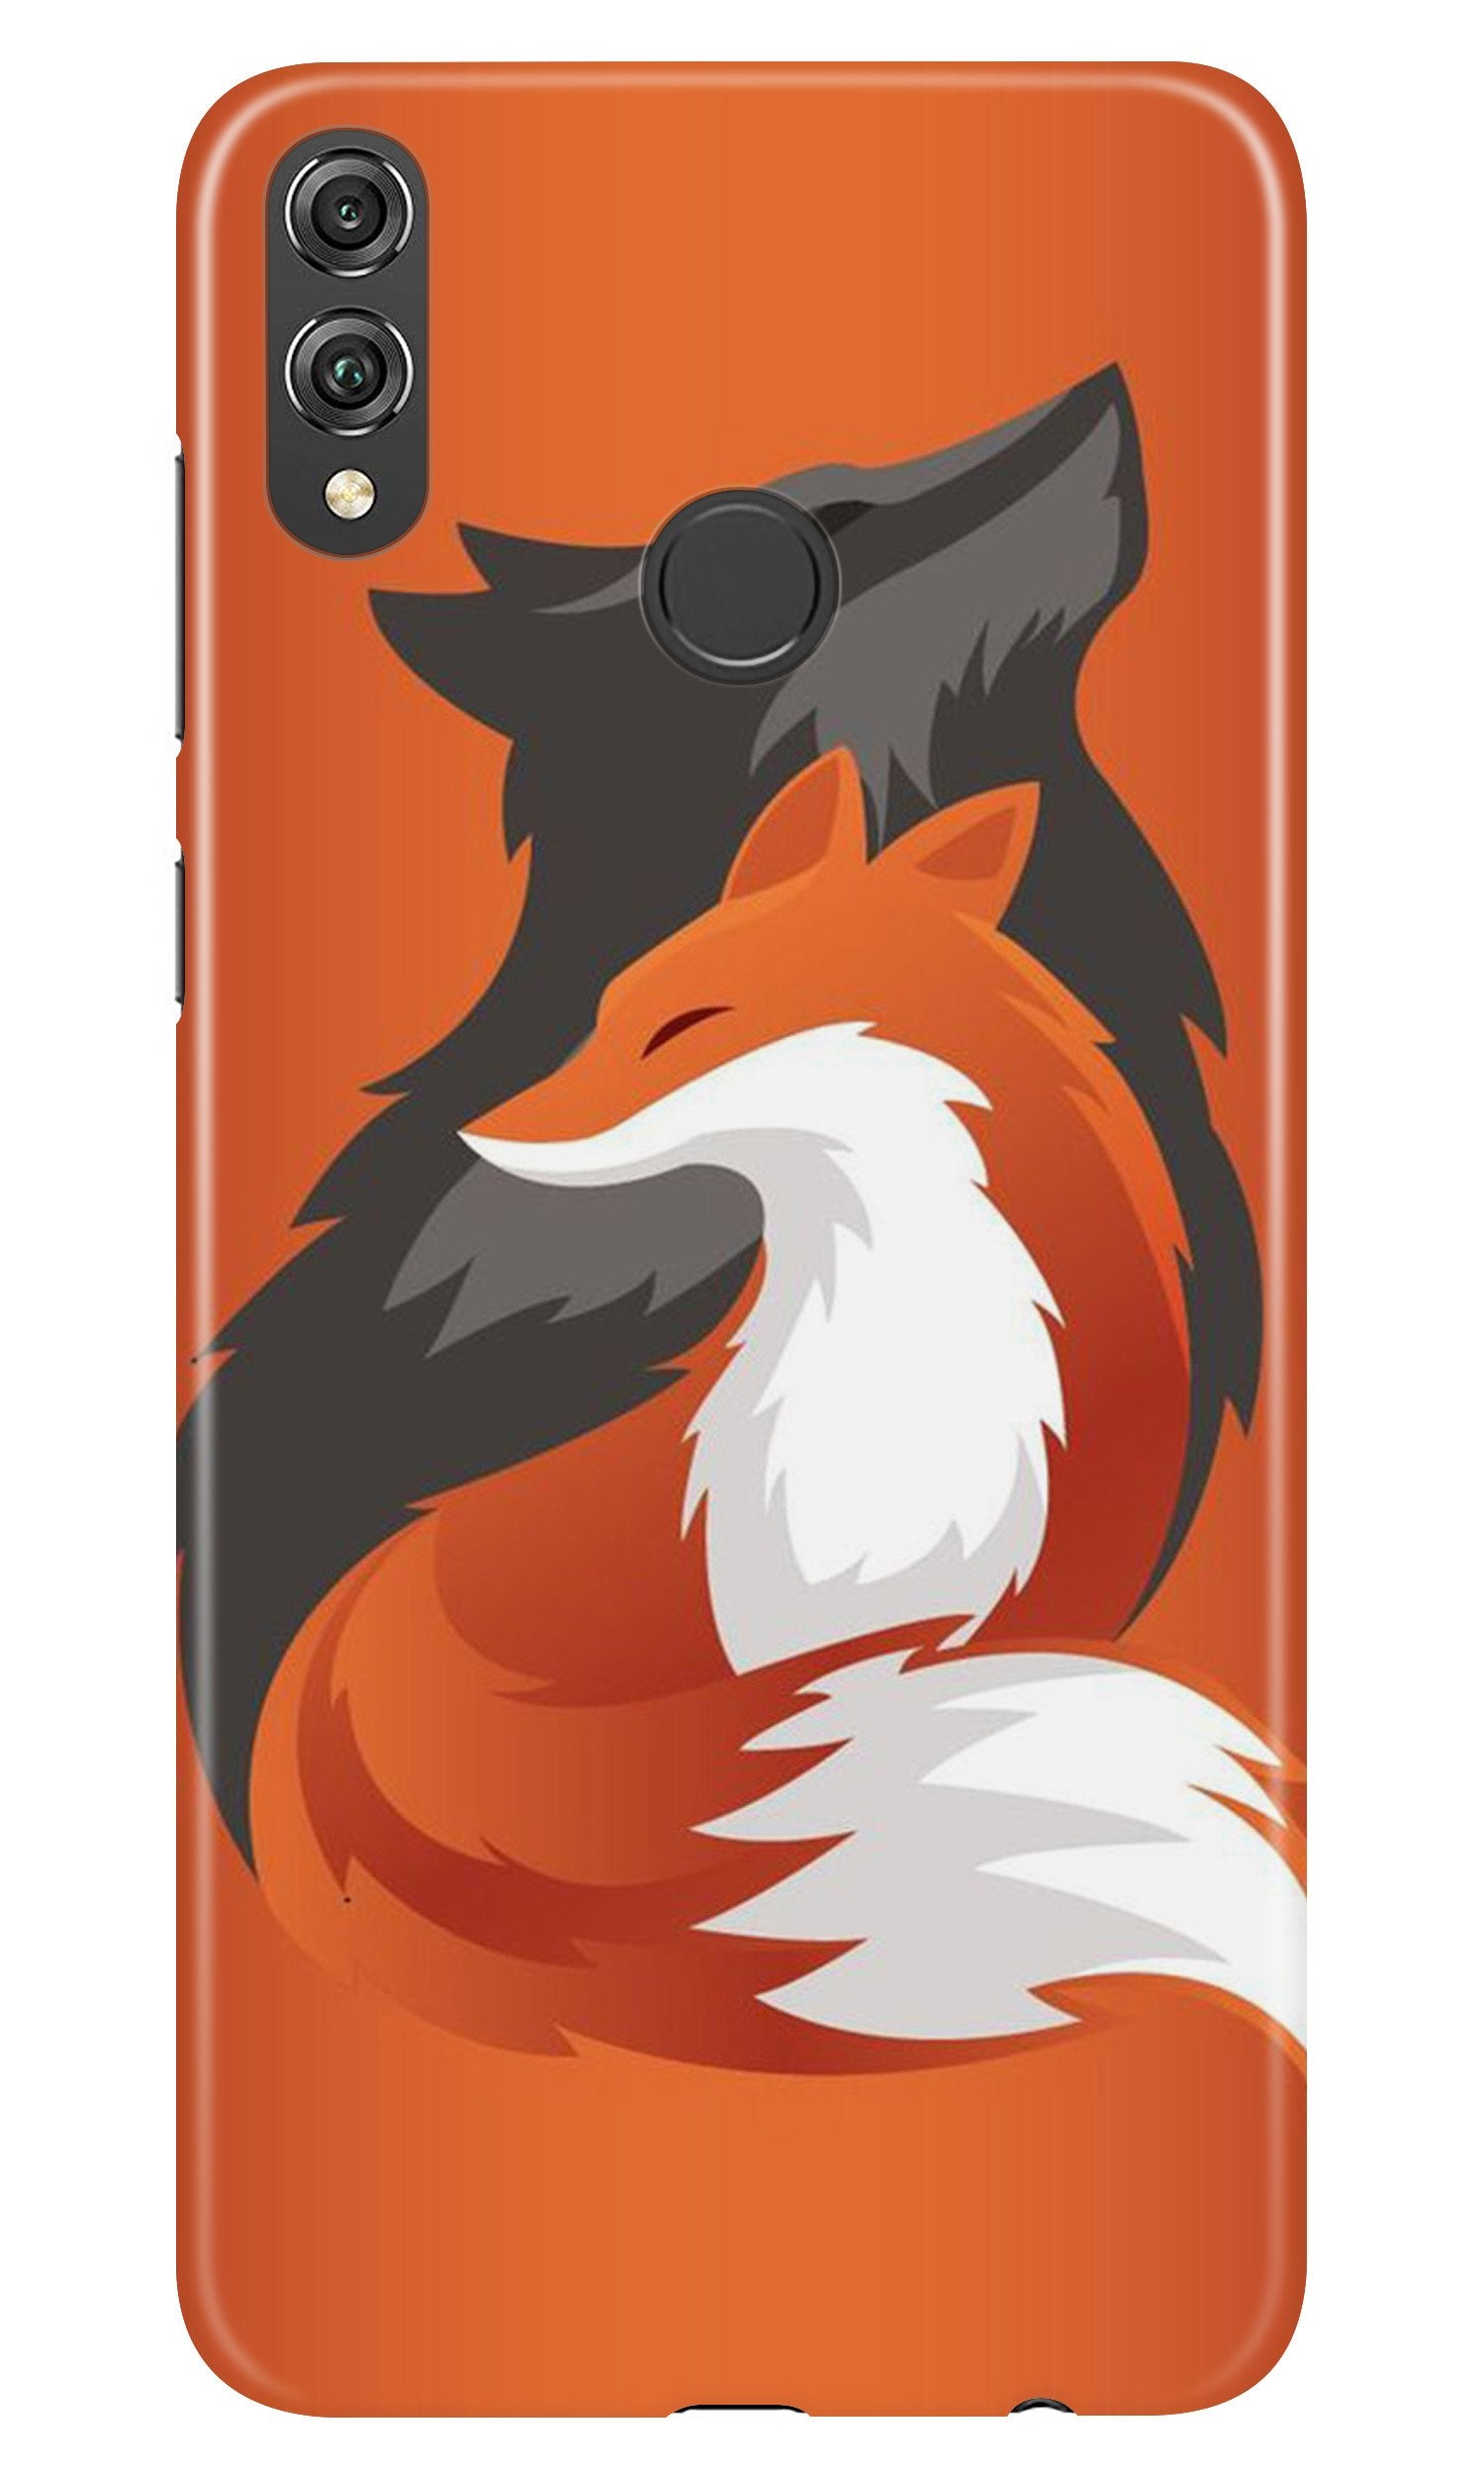 WolfCase for Infinix Hot 7 Pro (Design No. 224)